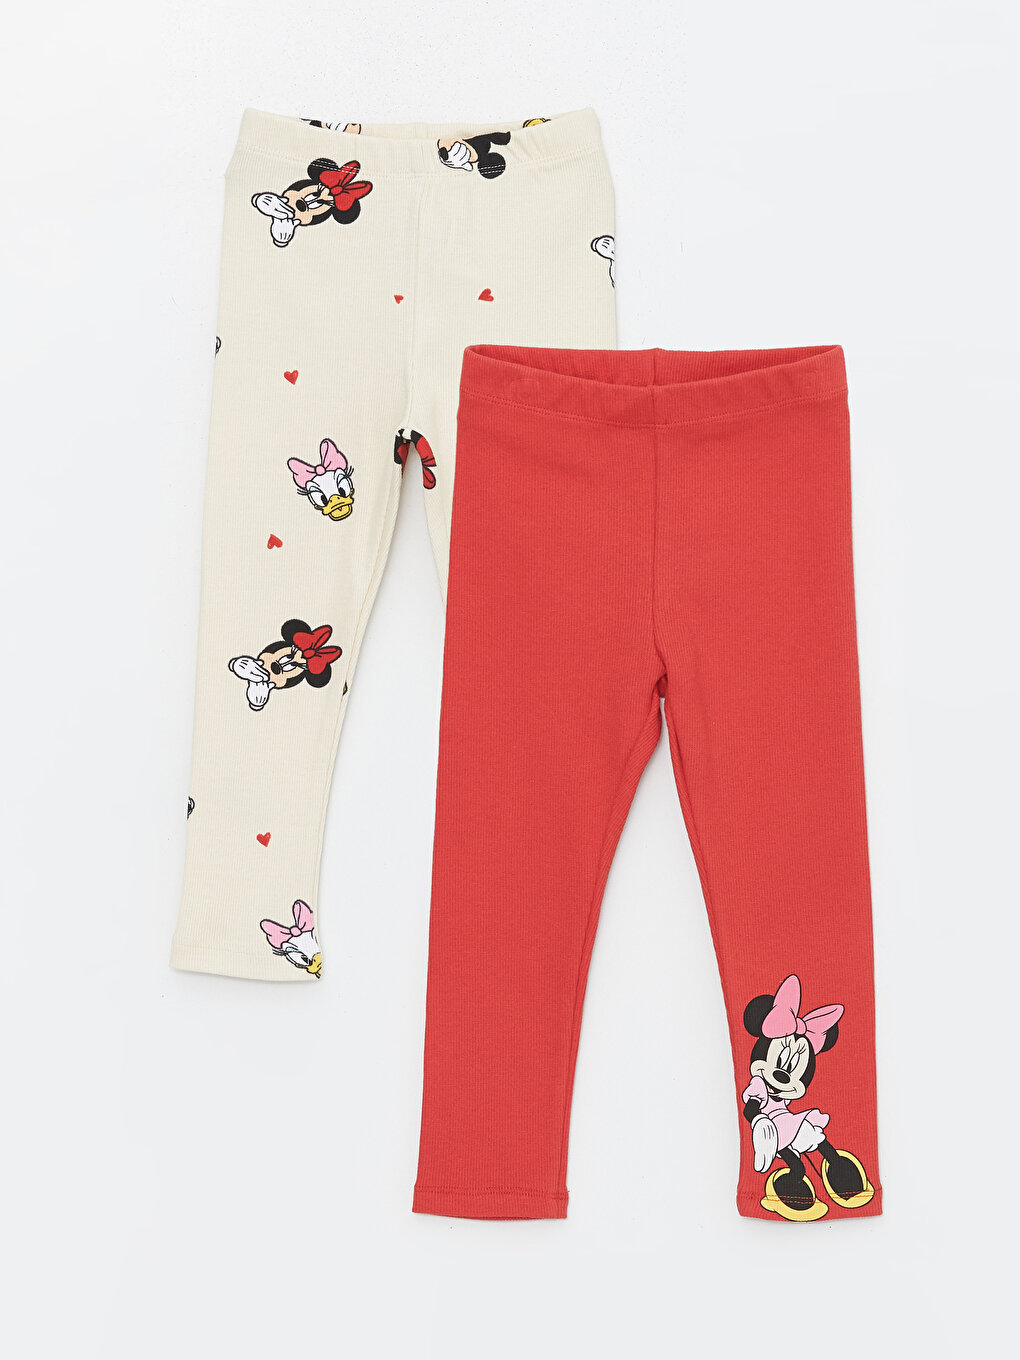 Elastic Waist Minnie Mouse Printed Baby Girl Tights 2 Pack -S49971Z1-R23 -  S49971Z1-R23 - LC Waikiki